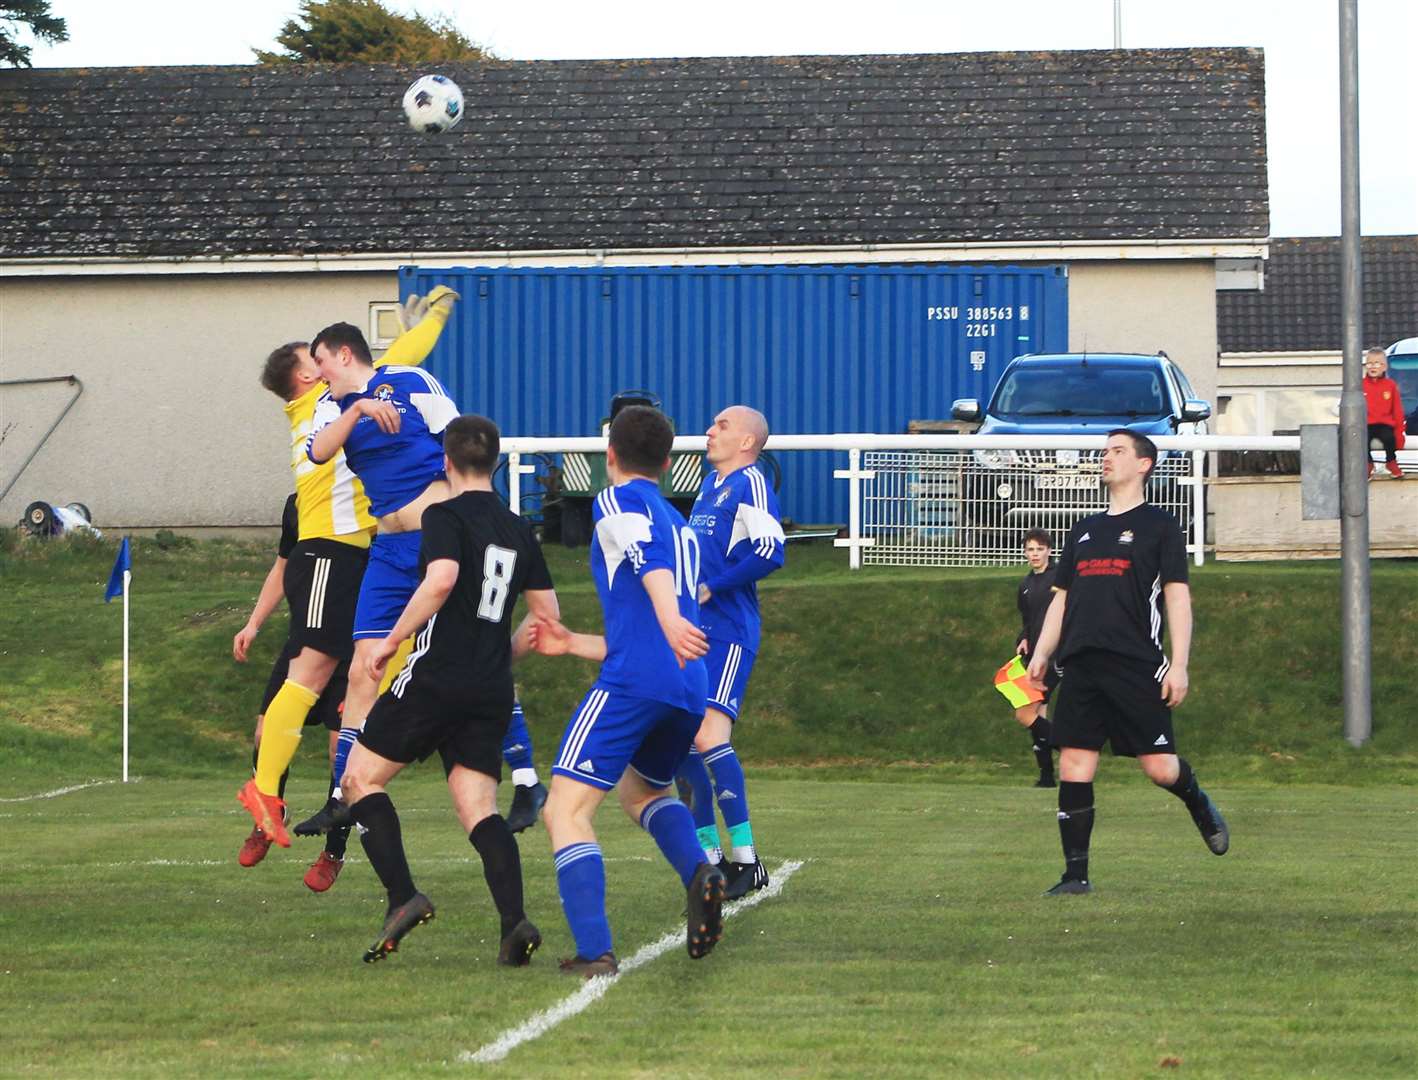 Lybster goalkeeper Billy Miller – pictured coming out to make a save against Keiss earlier this season – was praised for his contribution to this week's win against Watten.